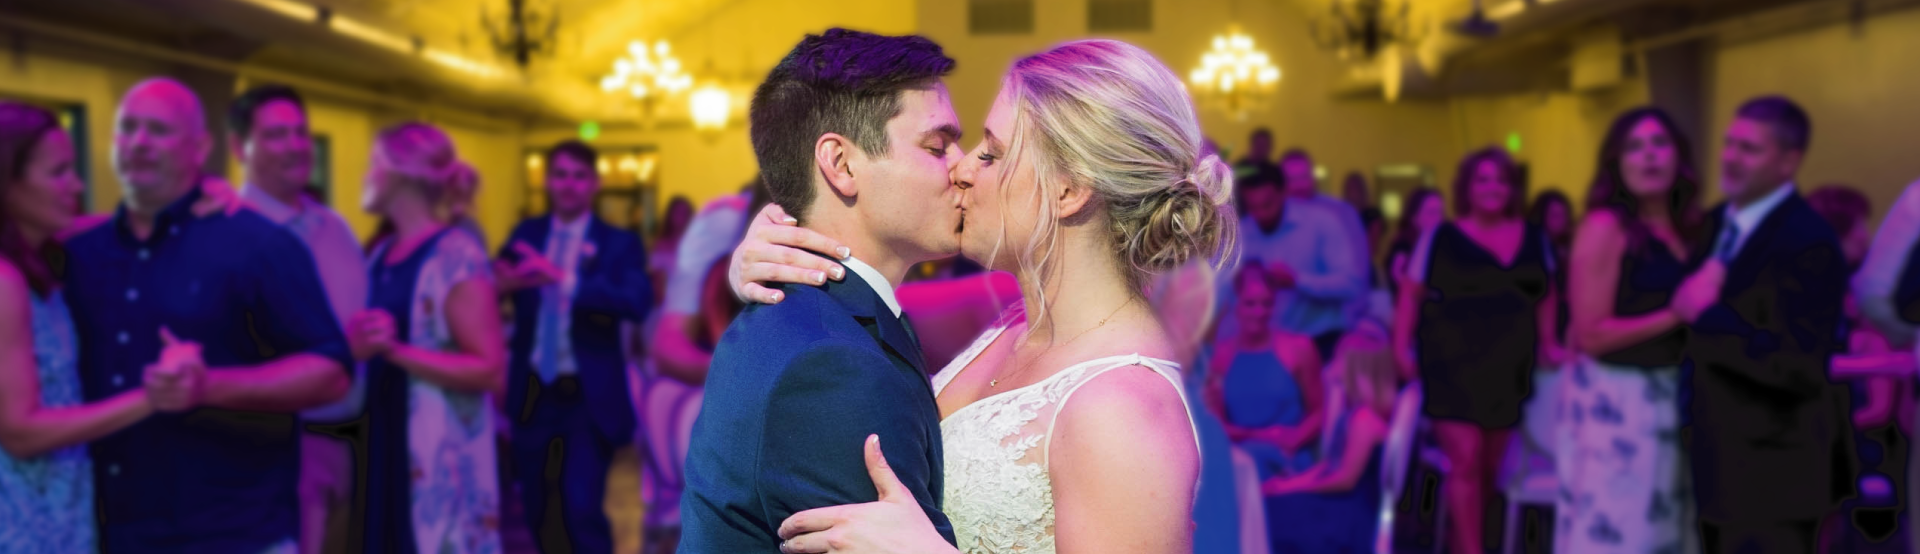 A bride and groom kiss on on the dance floor of their reception with guests around them.